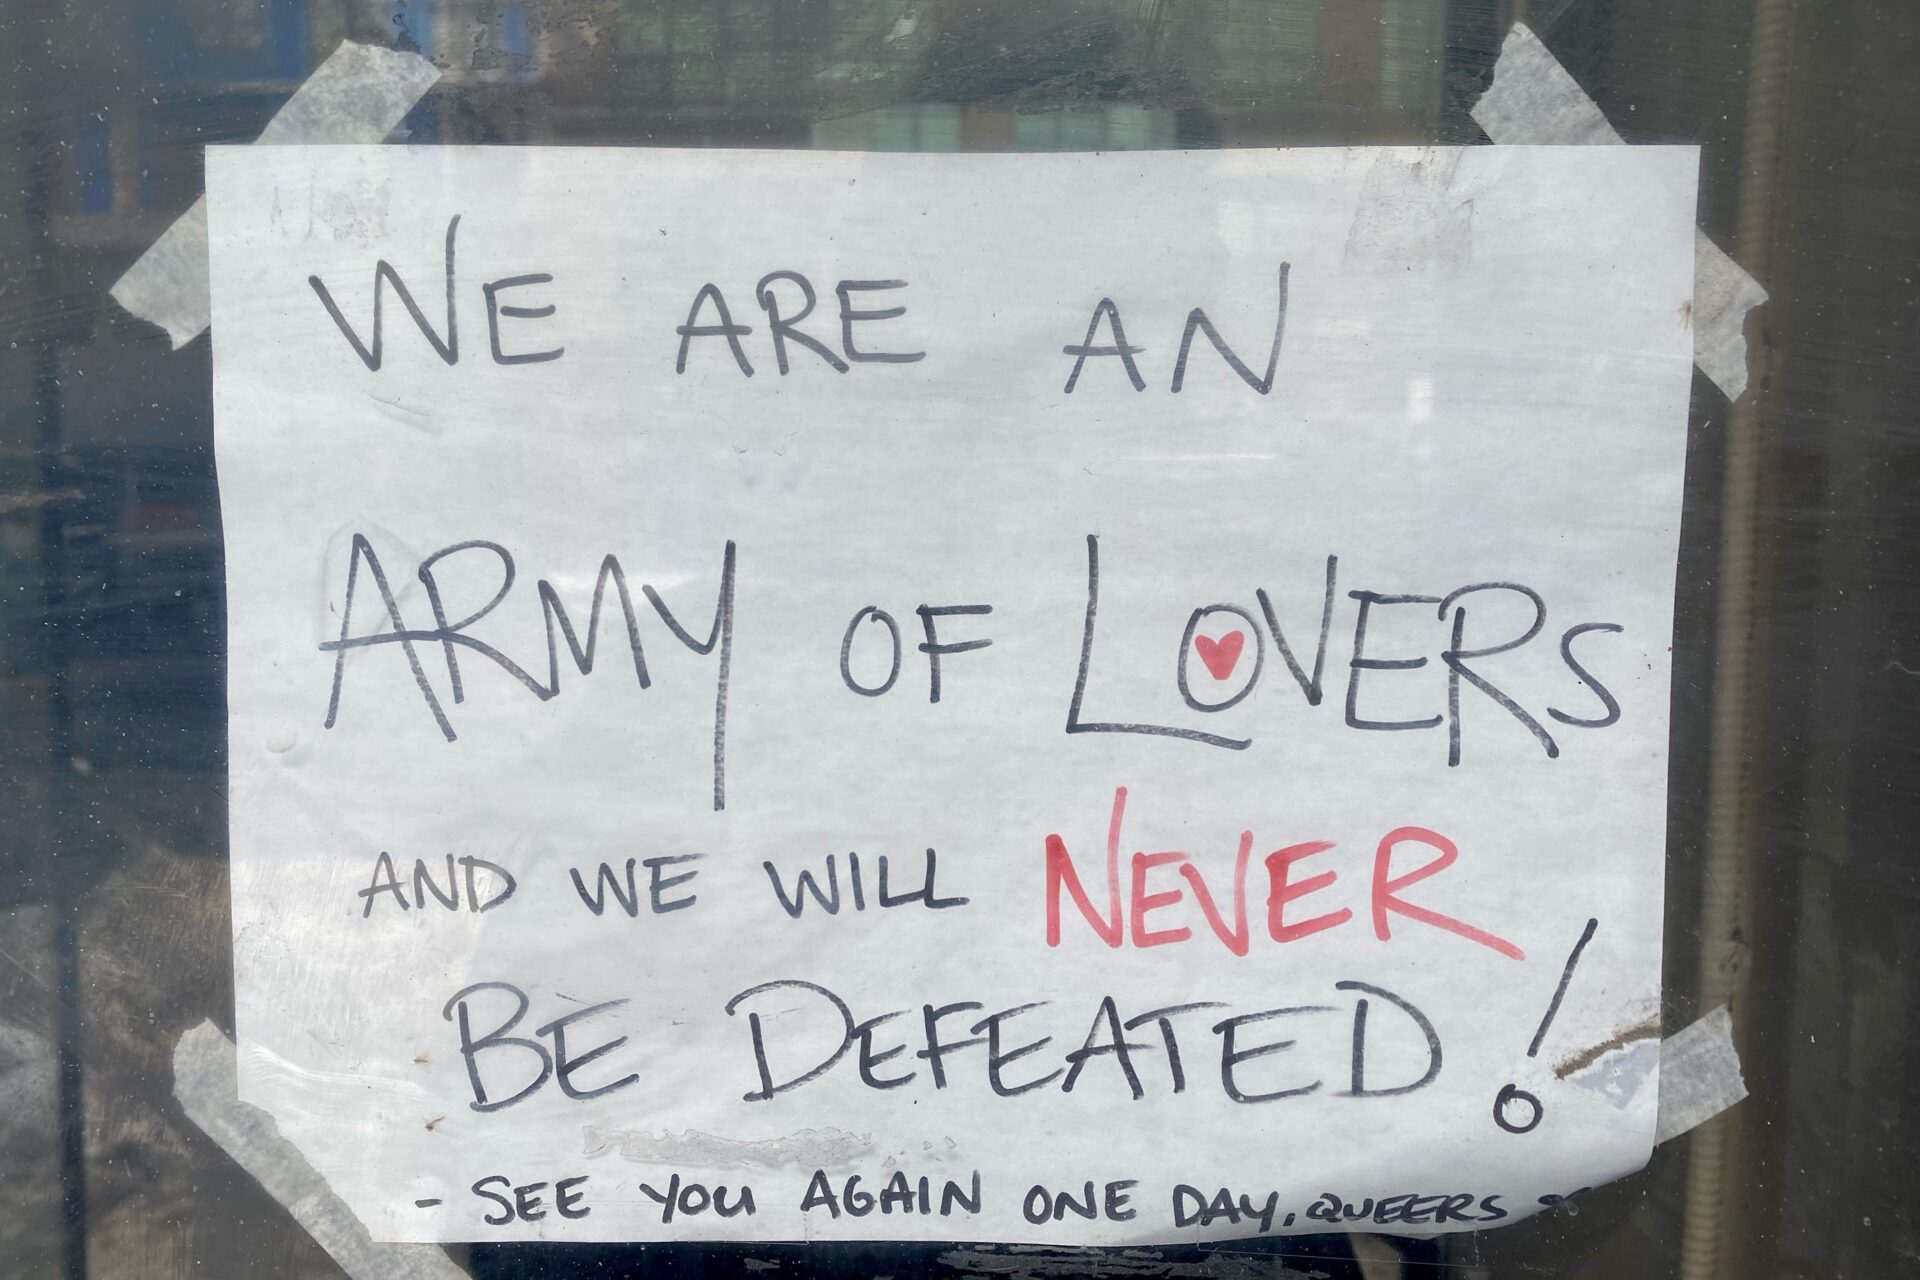 A hand-written sign that says "We are an ARMY of LOVERS and we will NEVER BE DEFEATED"